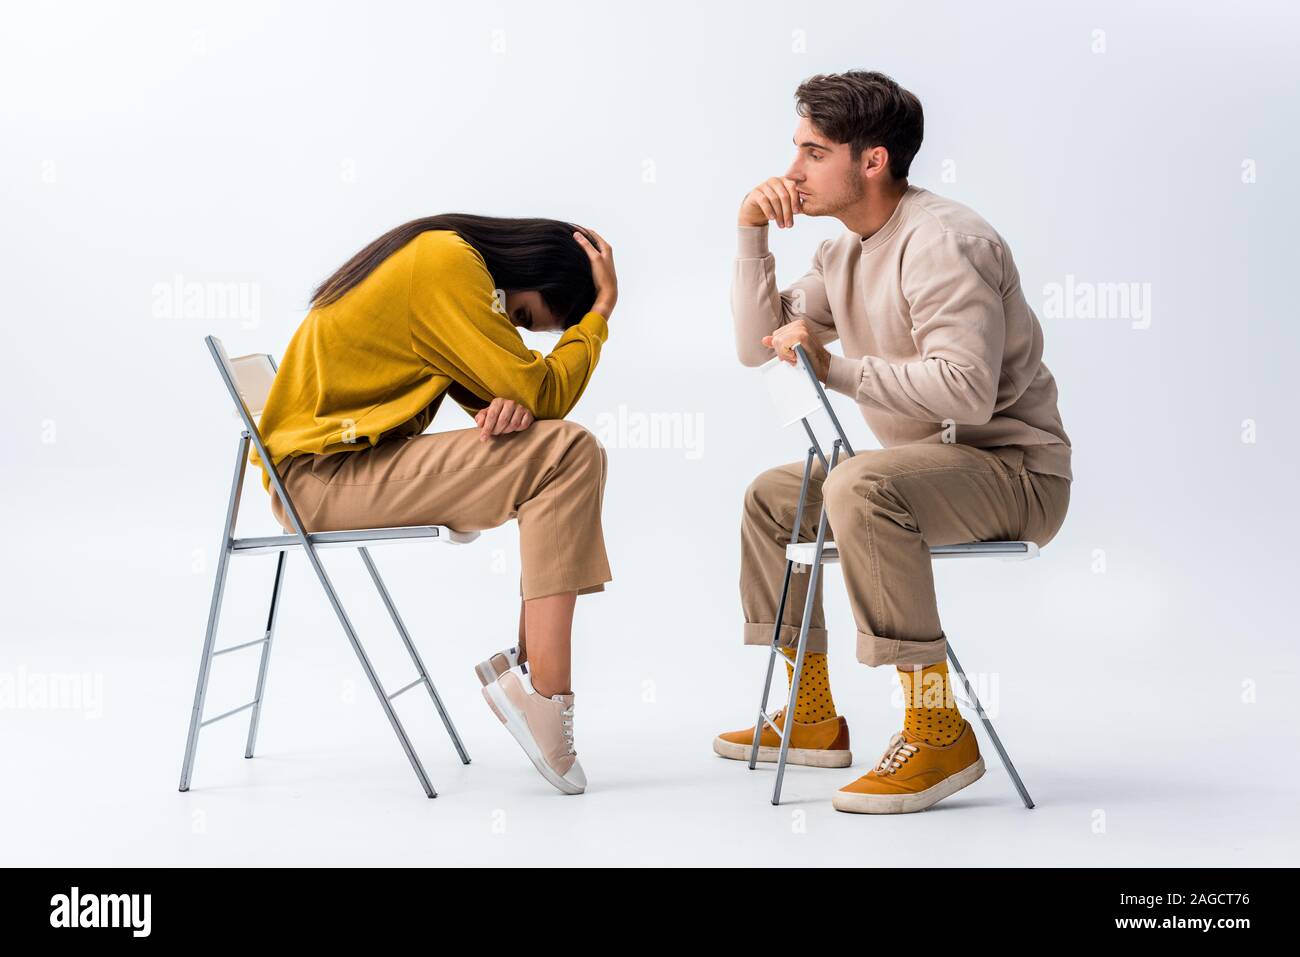 man sitting on chair and looking at upset woman covering face on white Stock Photo